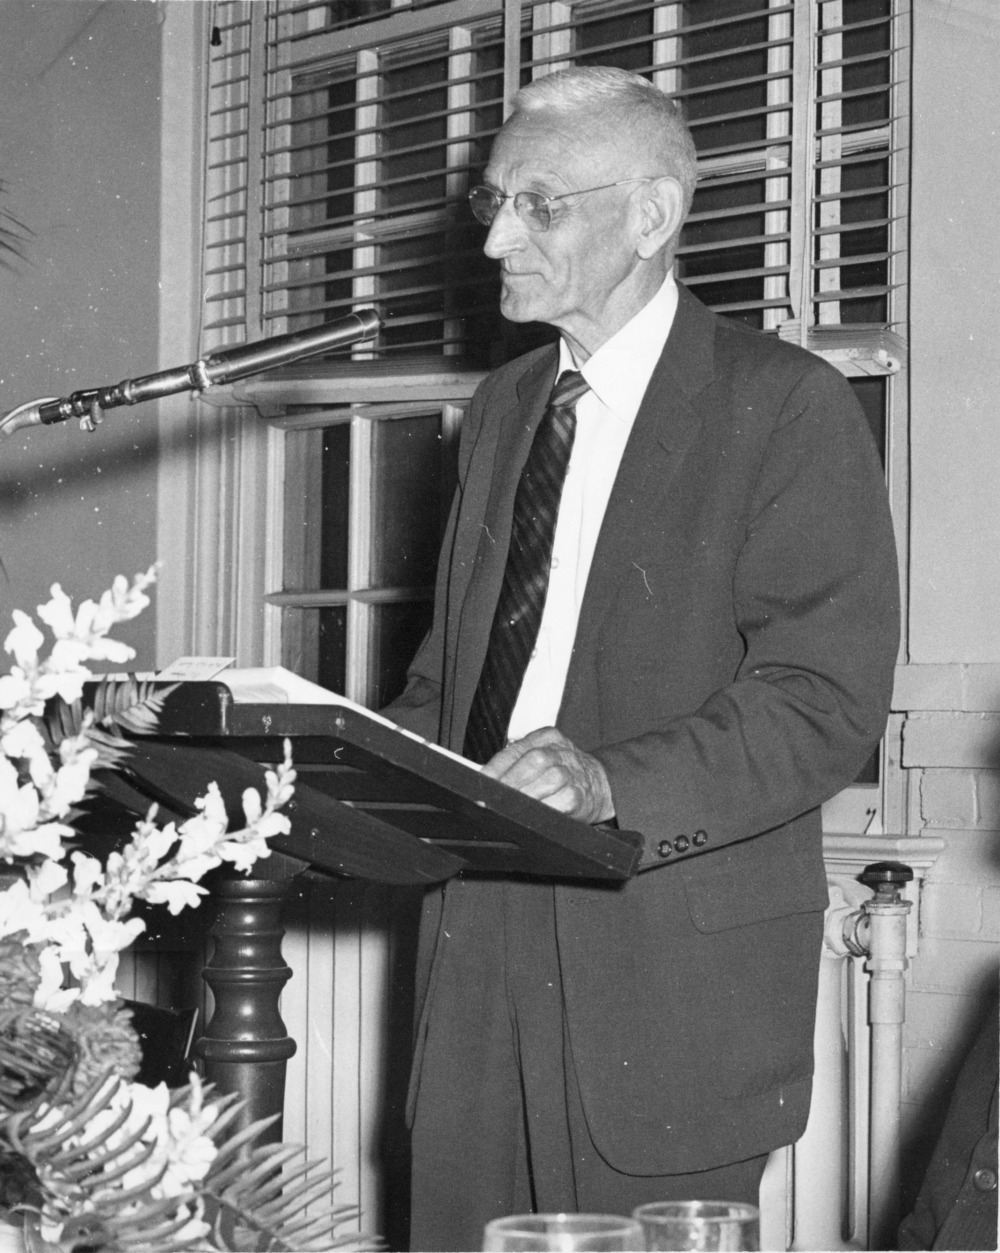     Edward S. King, general secretary of North Carolina State College YMCA from 1919 to 1955, standing at podium, 1960